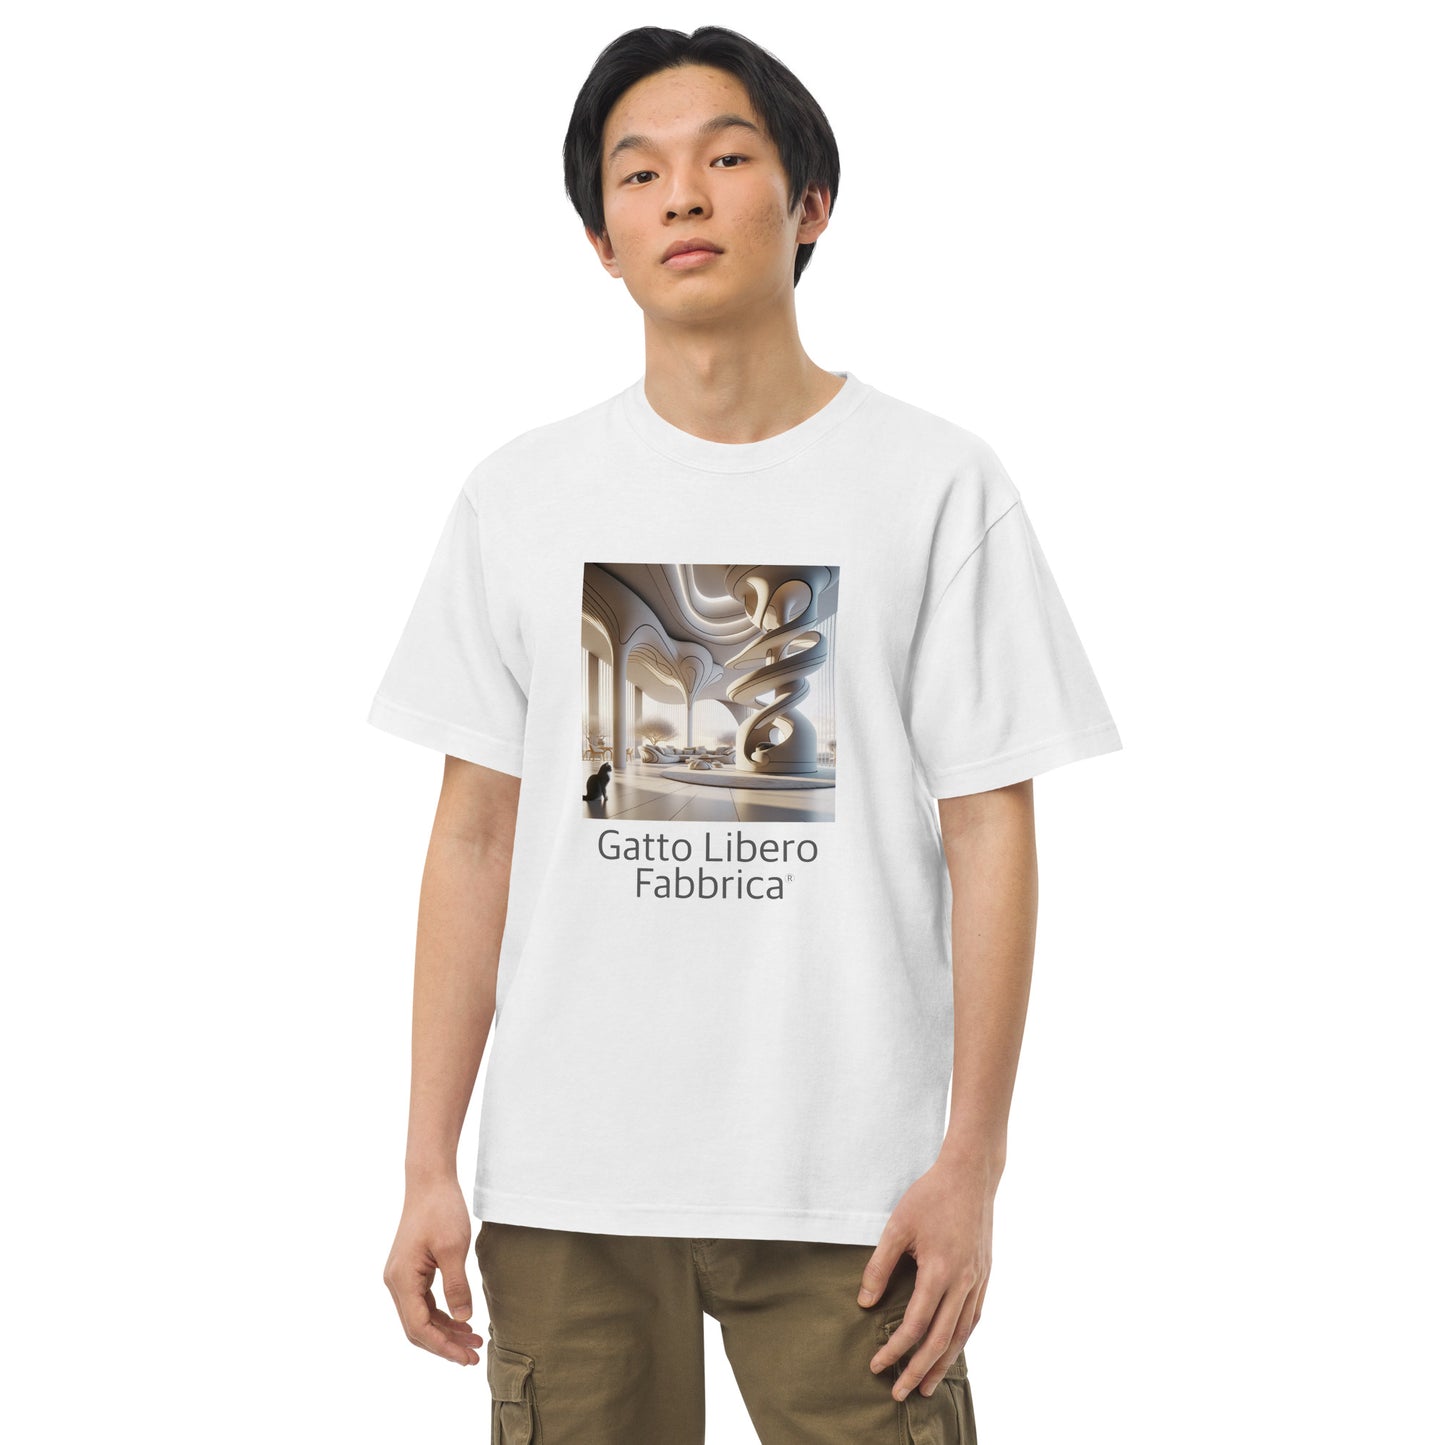 Cattower tee_ZH